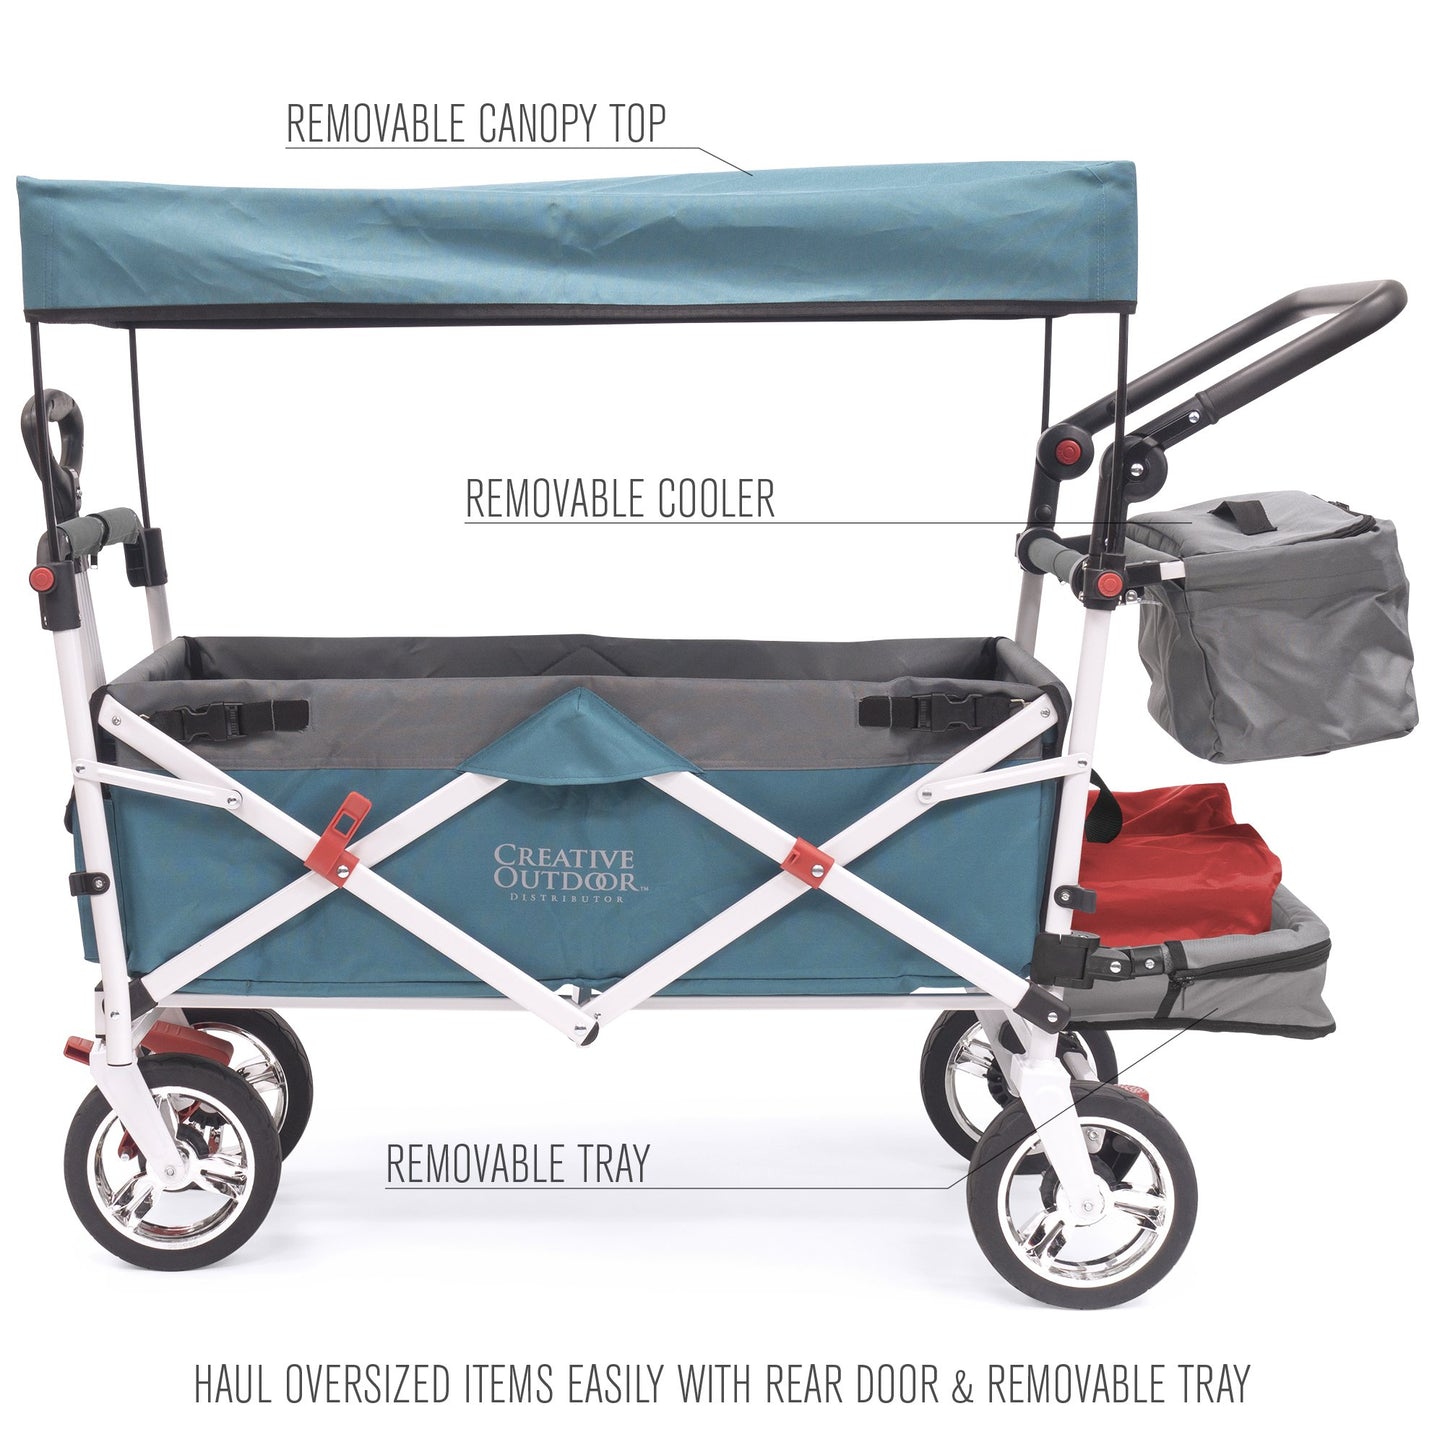 push-pull-silver-series-plus-folding-wagon-stroller-with-canopy-teal